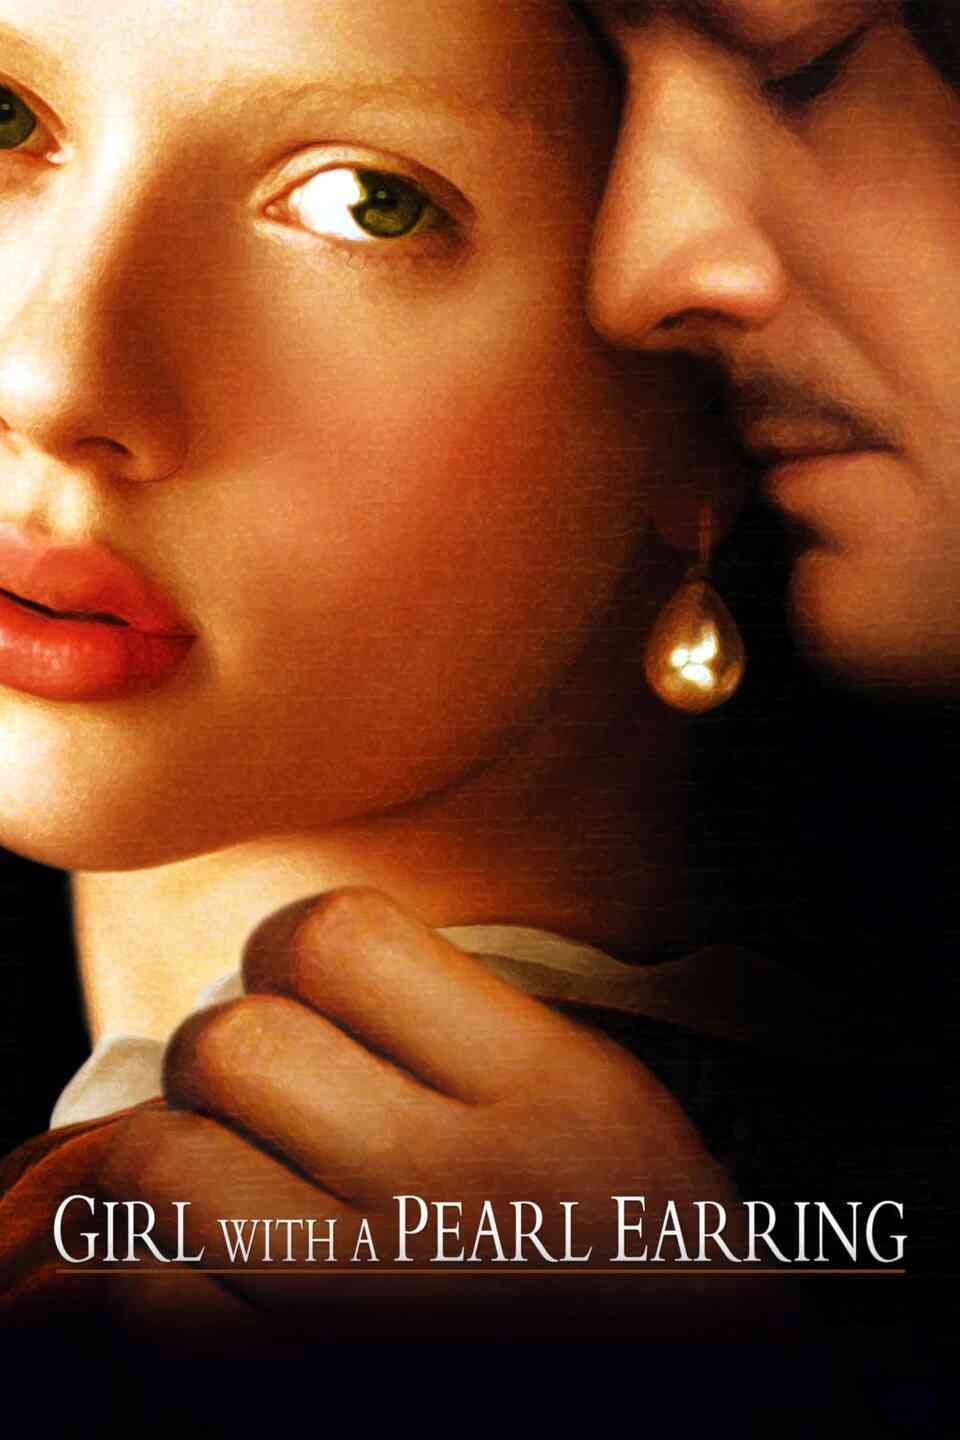 Read Girl with the Pearl Earring screenplay (poster)